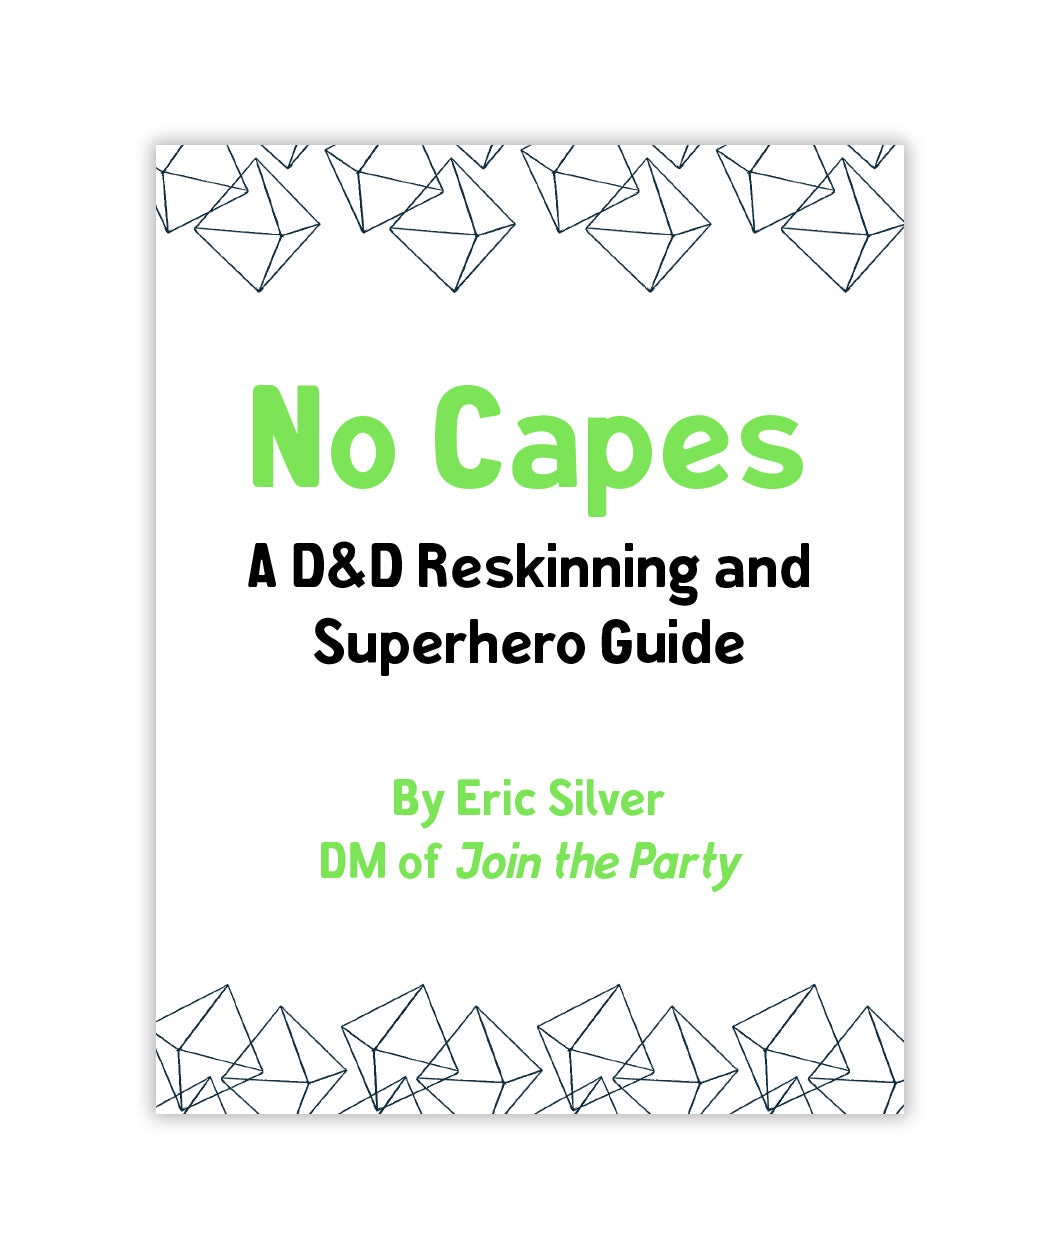 No Capes: A D&D Reskinning and Superhero Guide